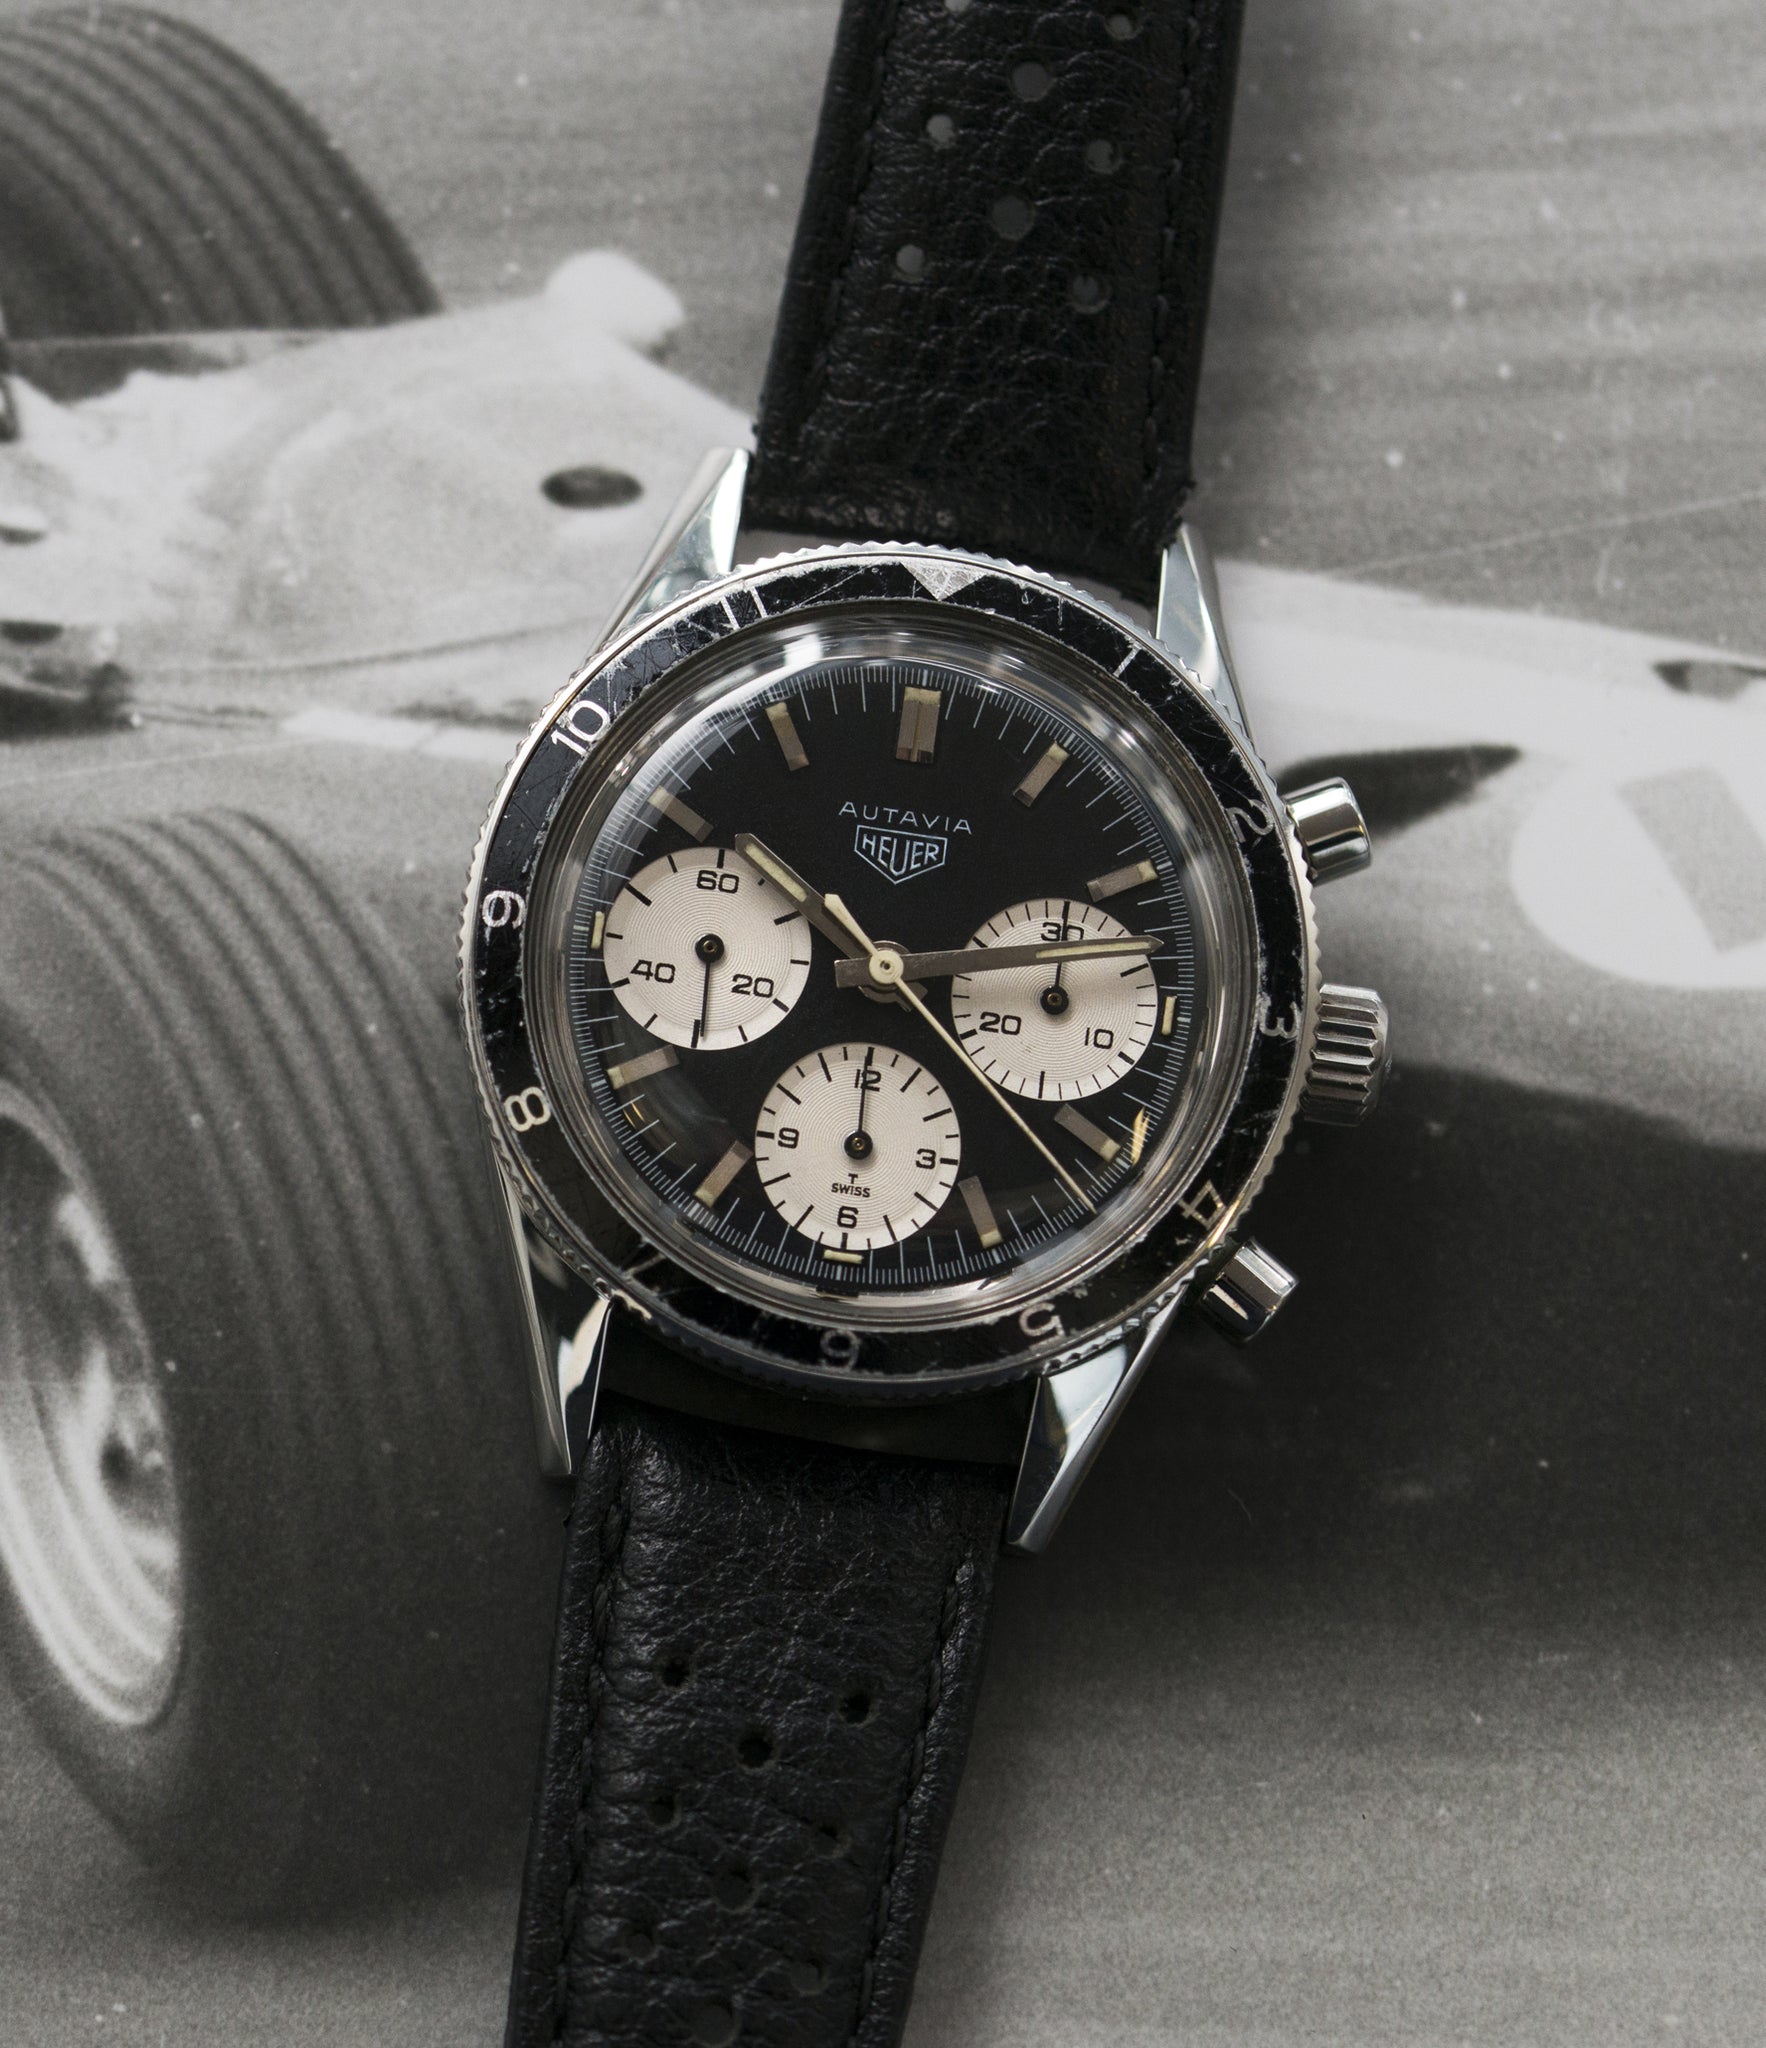 2446 Autavia Heuer Rindt 2446 Valjoux 72 manual-winding steel sport chronograph watch for sale online at A Collected Man London UK vintage rare watch specialist